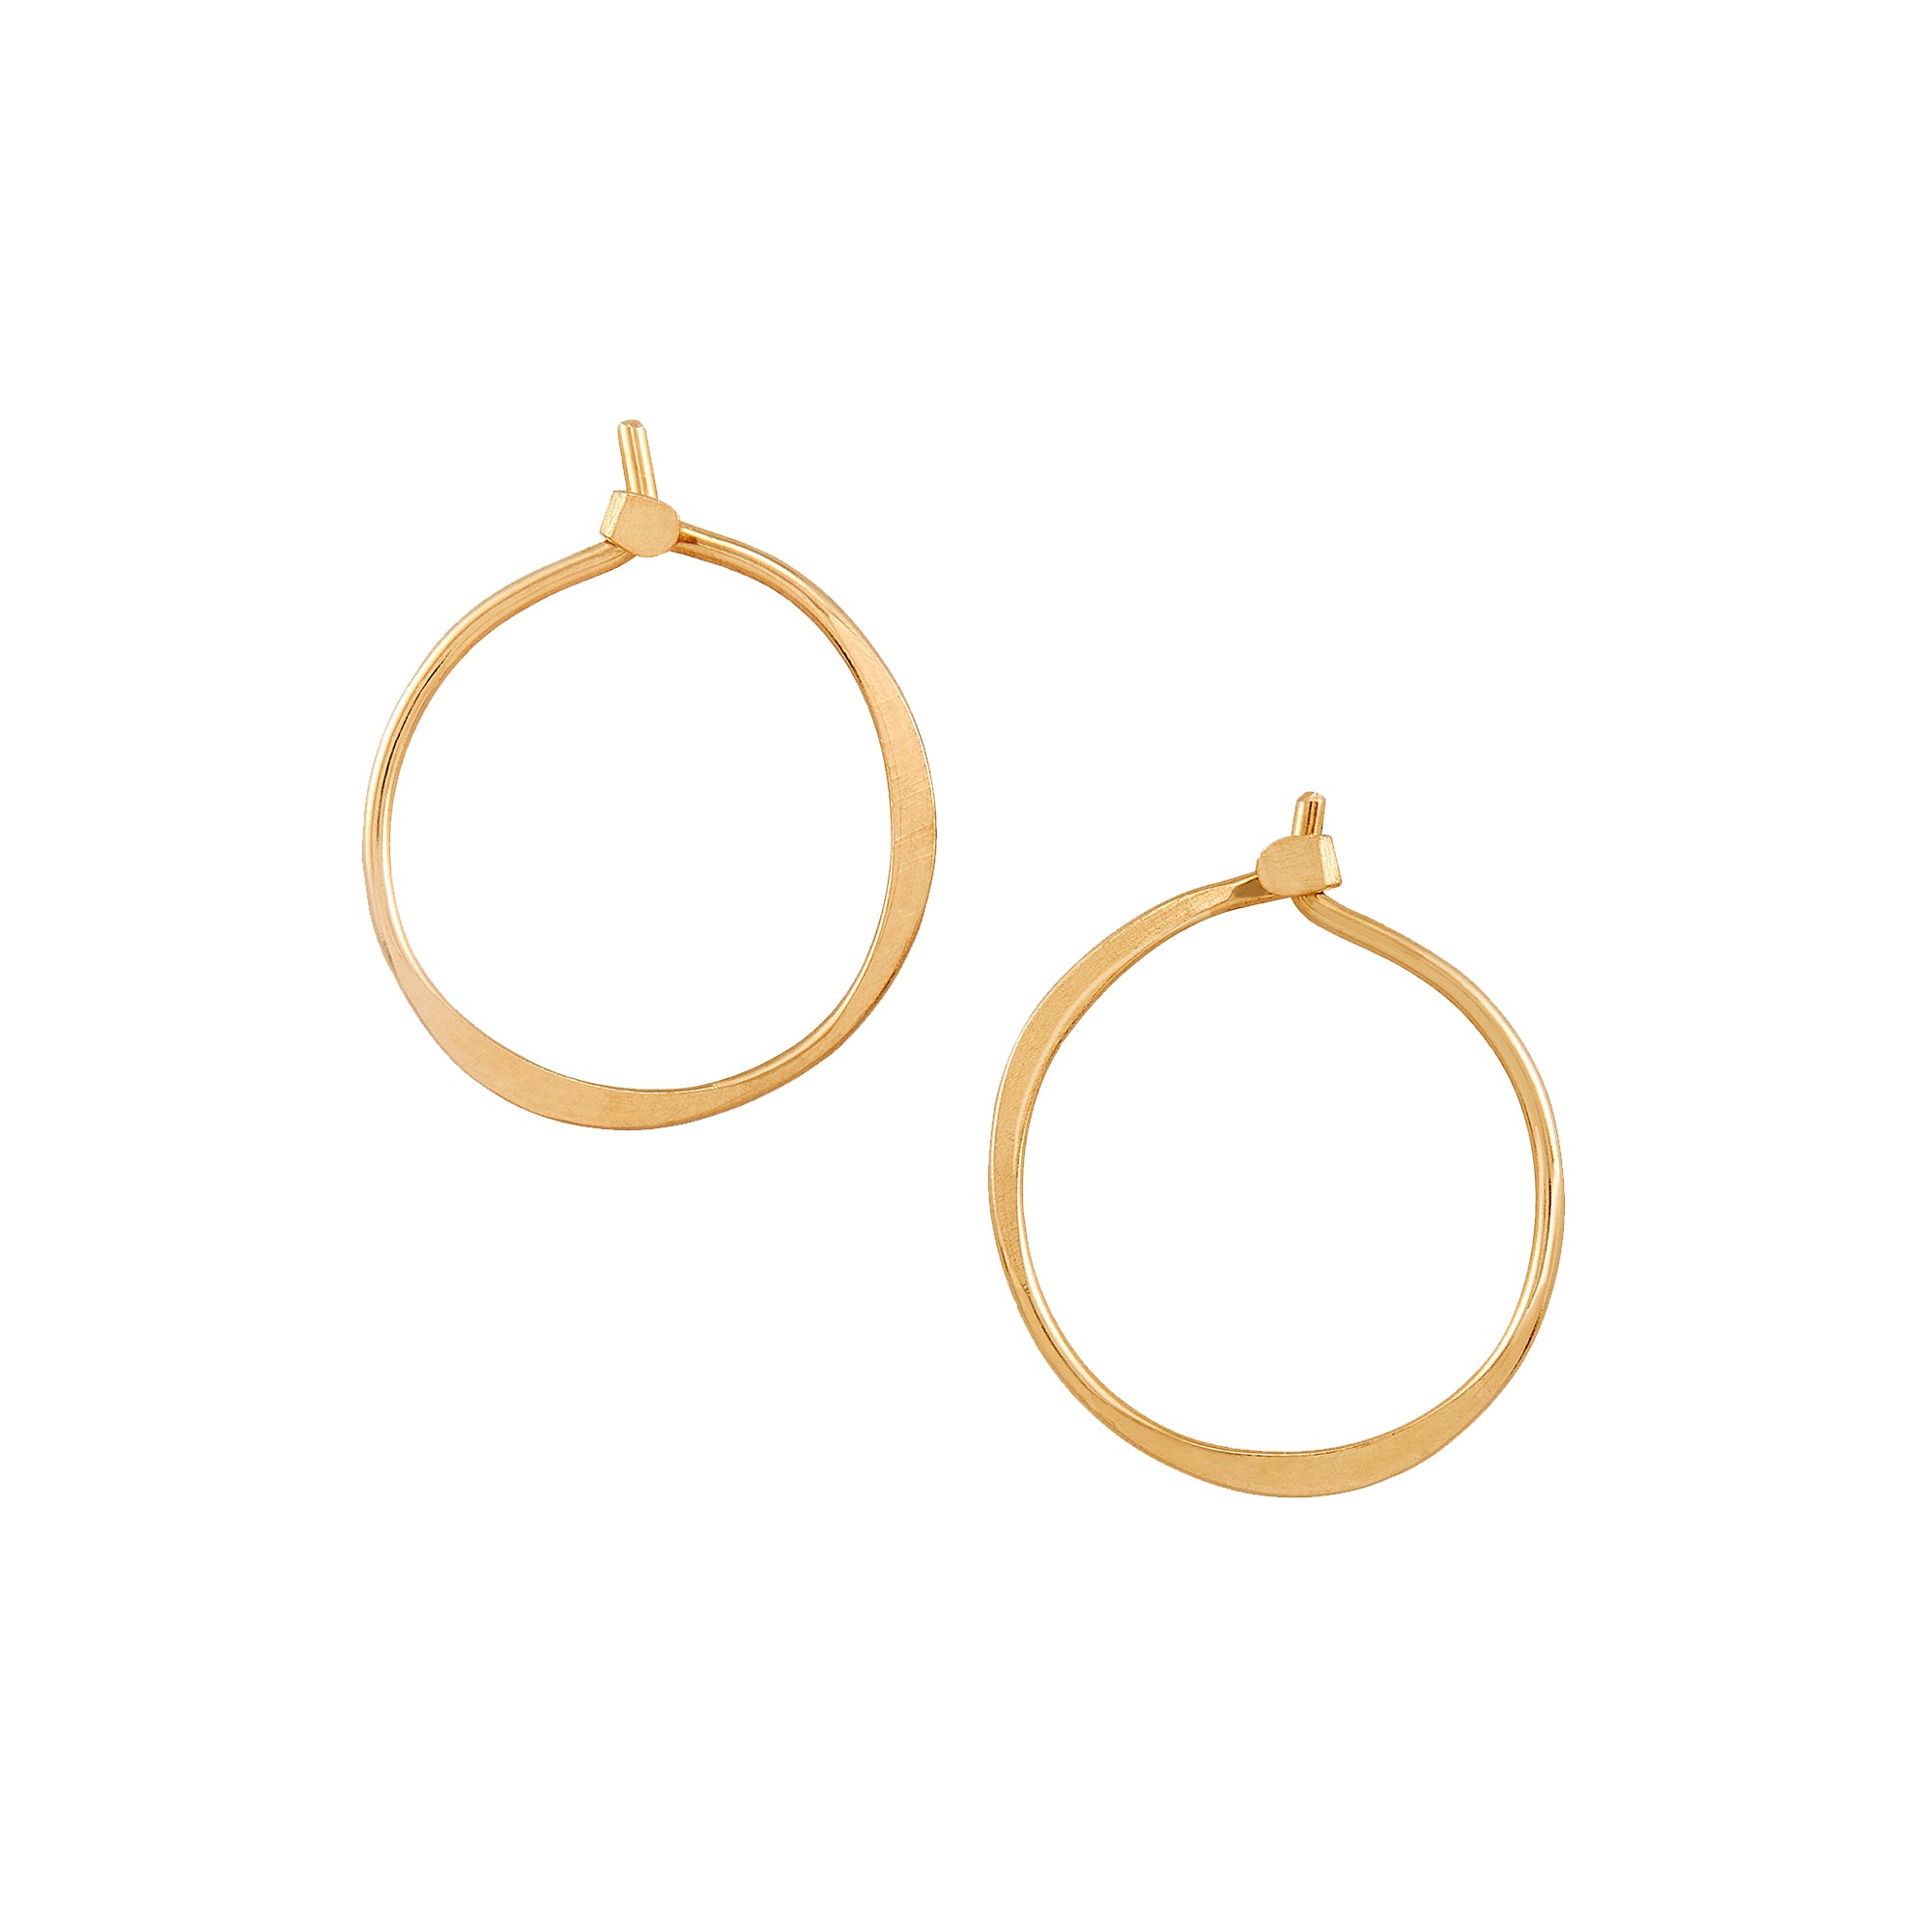 Classic Round Hoops in 14k gold, featuring an organic, hammered texture and quality craftsmanship.